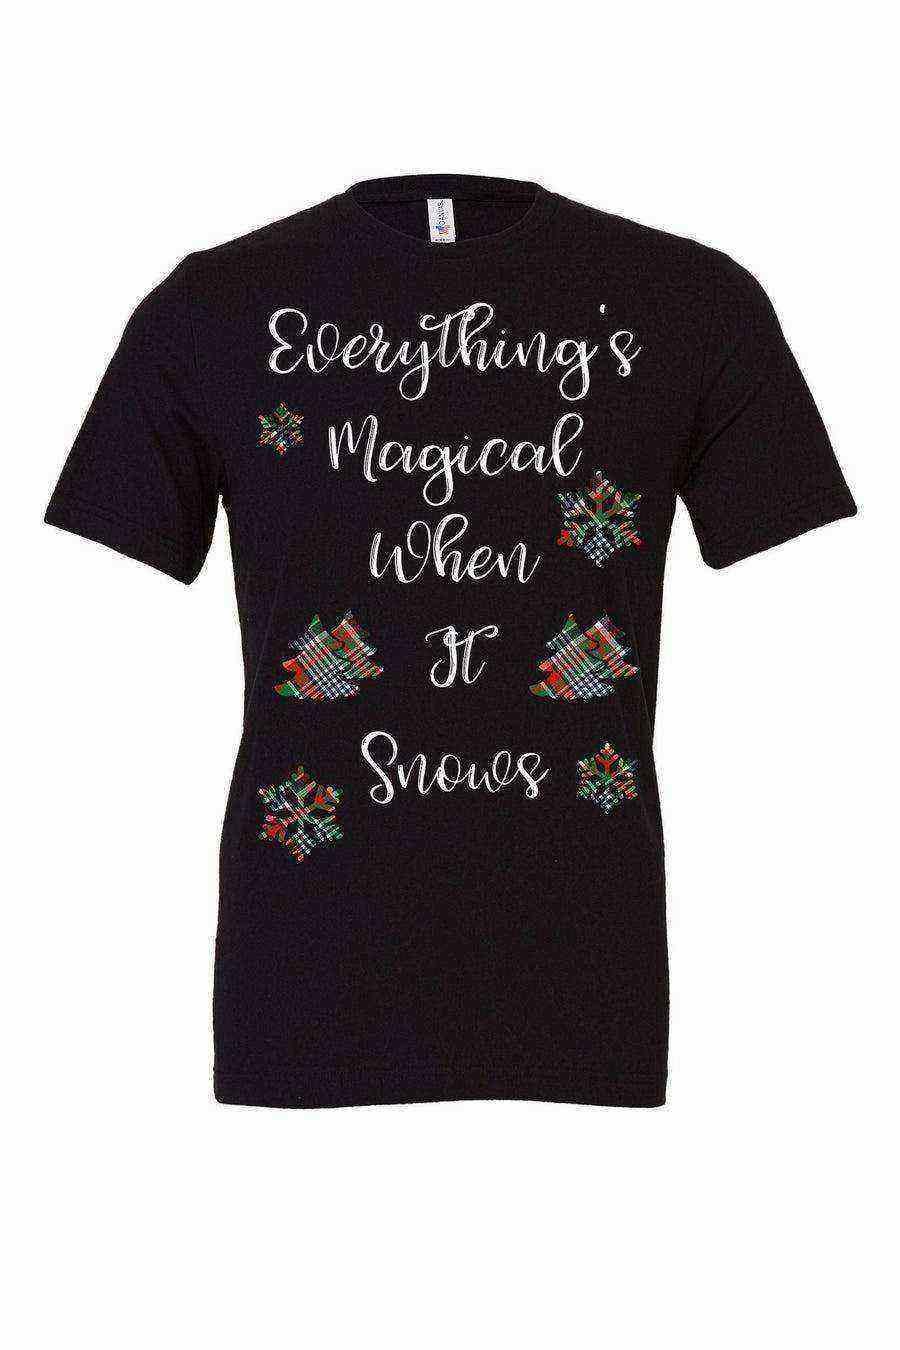 Womens | Everything's Magical When It Snows Shirt - Dylan's Tees